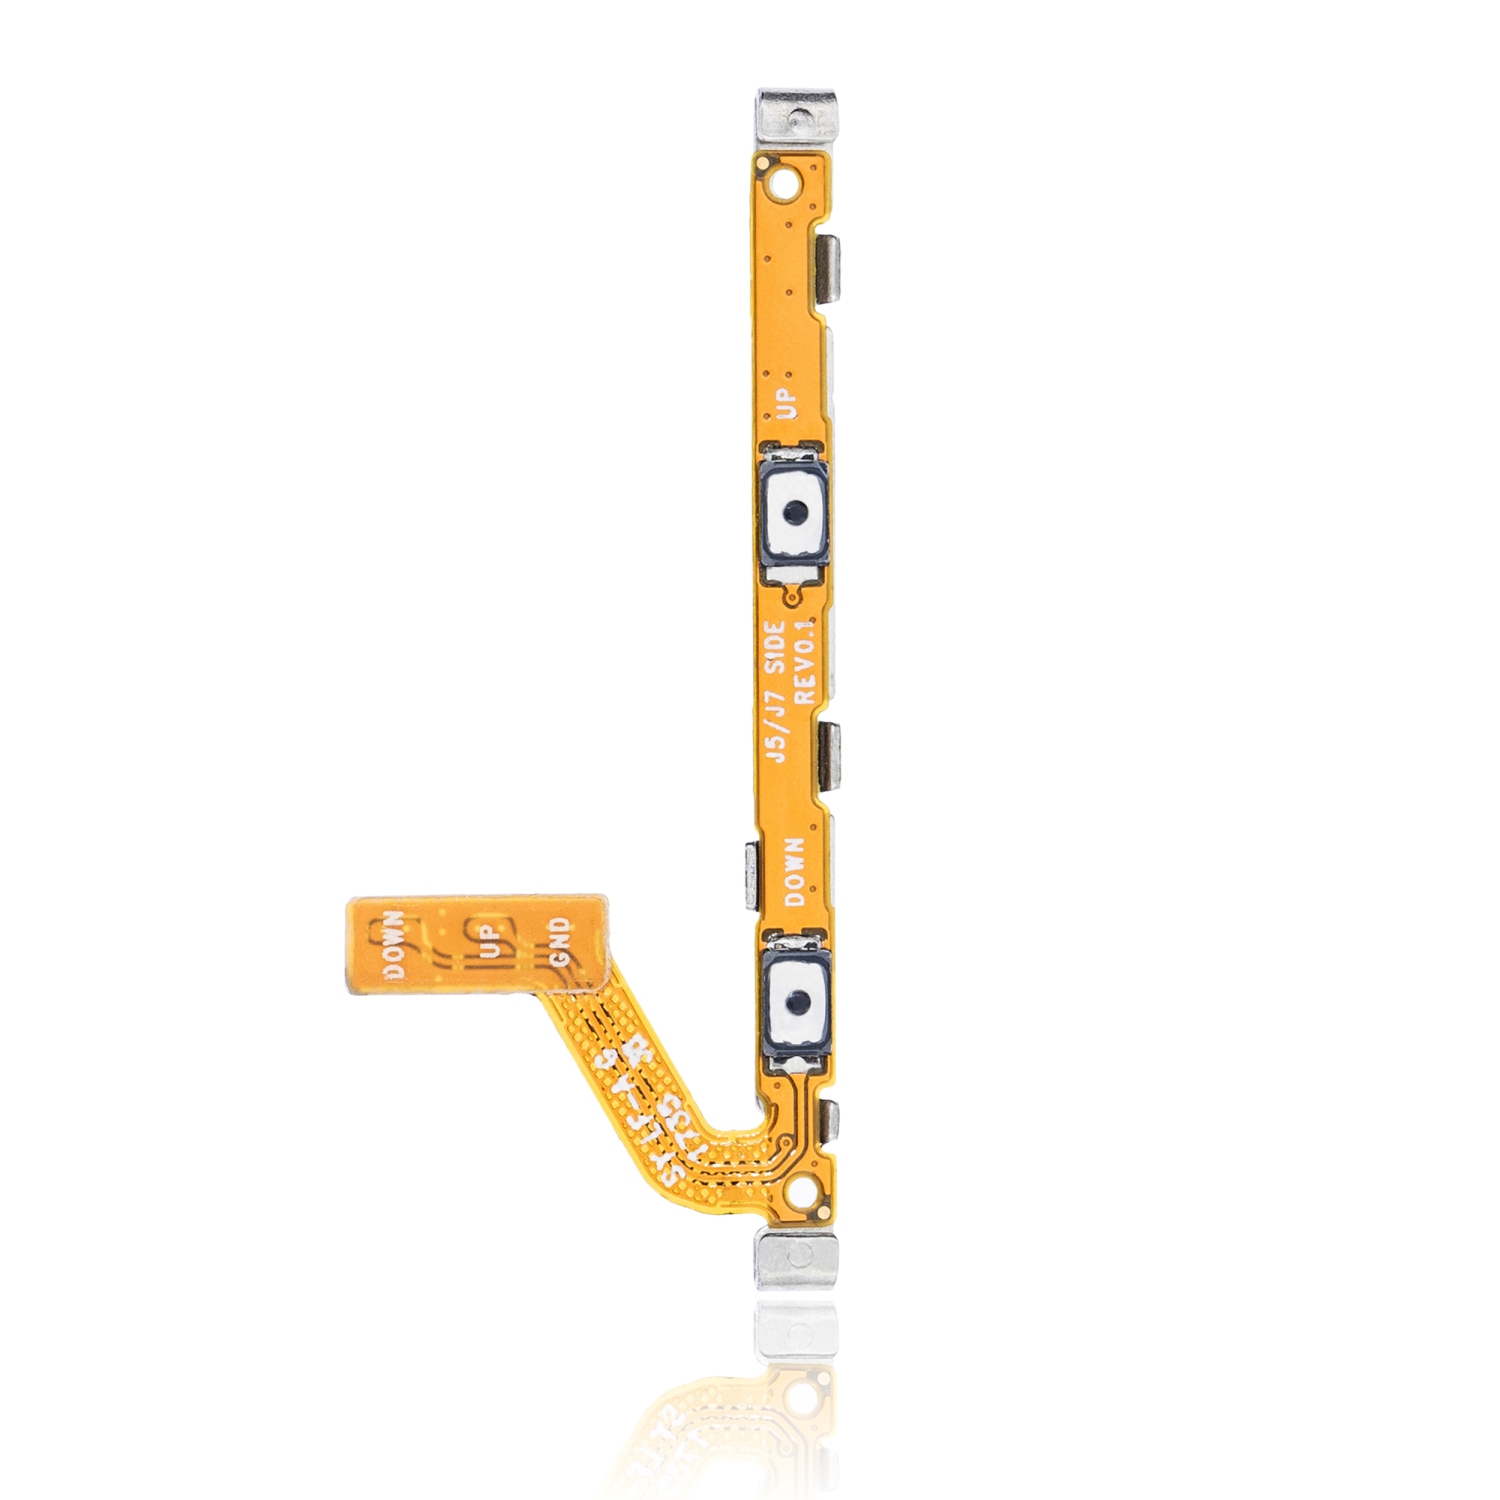 Replacement Volume Button Flex Cable Compatible For Samsung Galaxy J7 Pro (J730 / 2017)